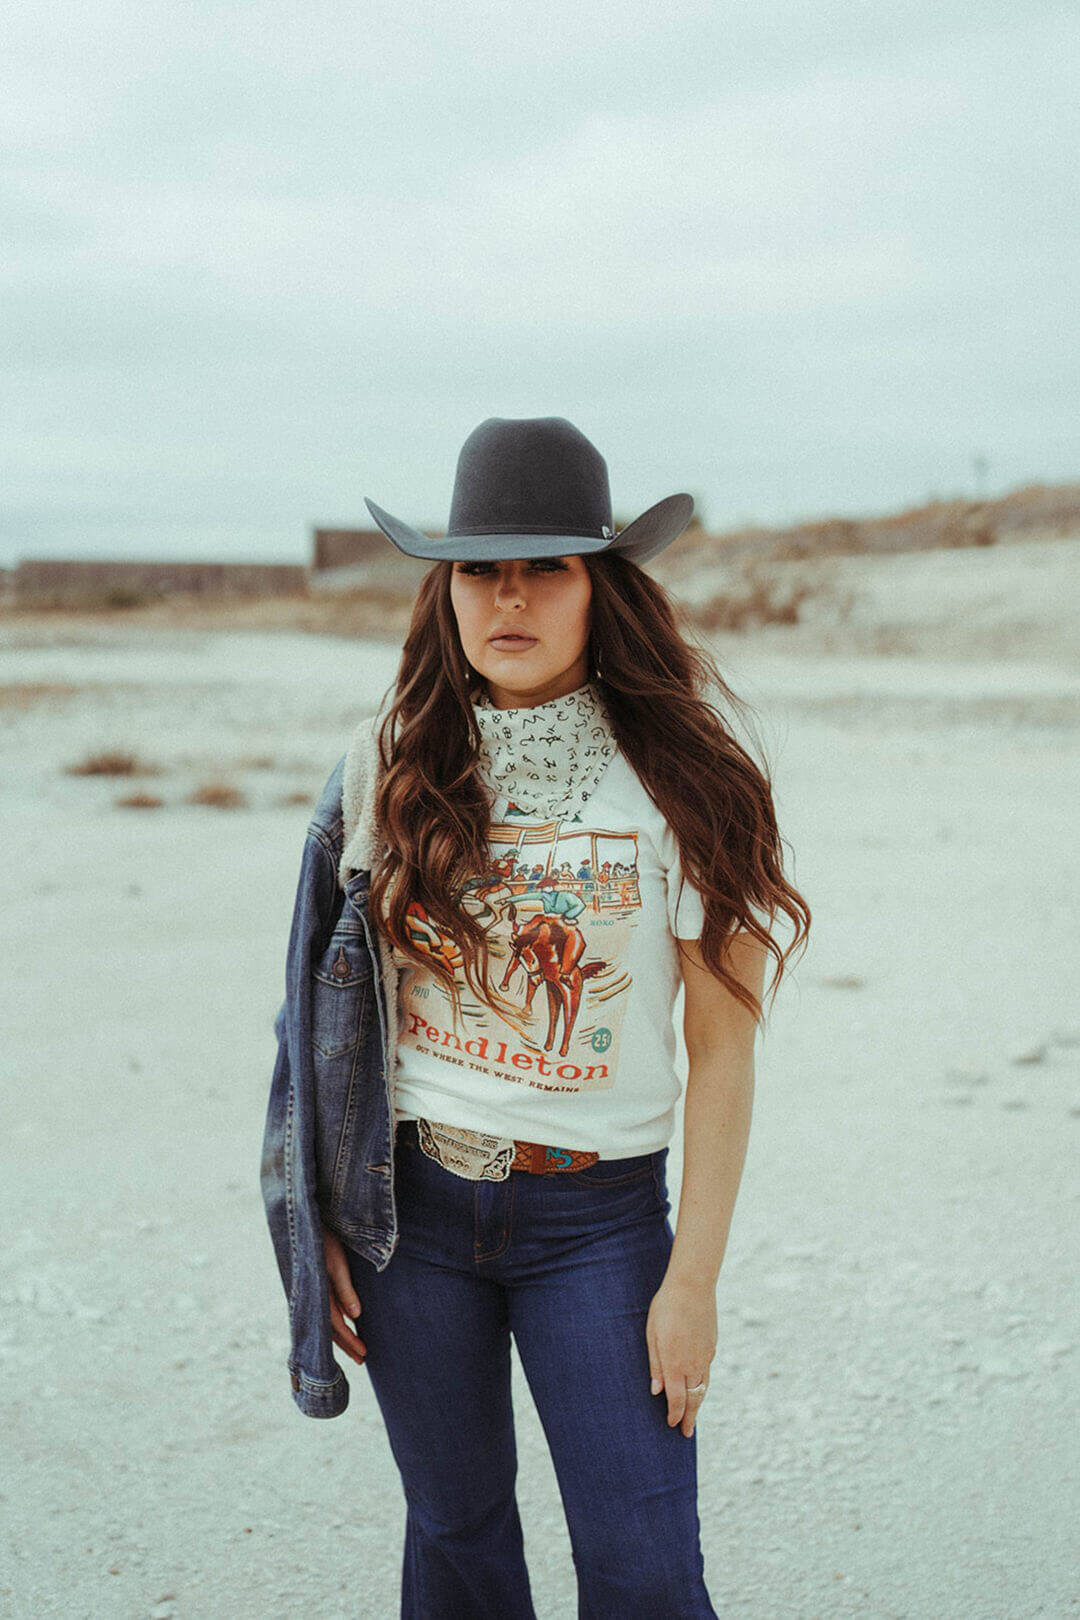 Woman modeling the XOXO Pendleton "where the west remains" tee by XOXO Company.